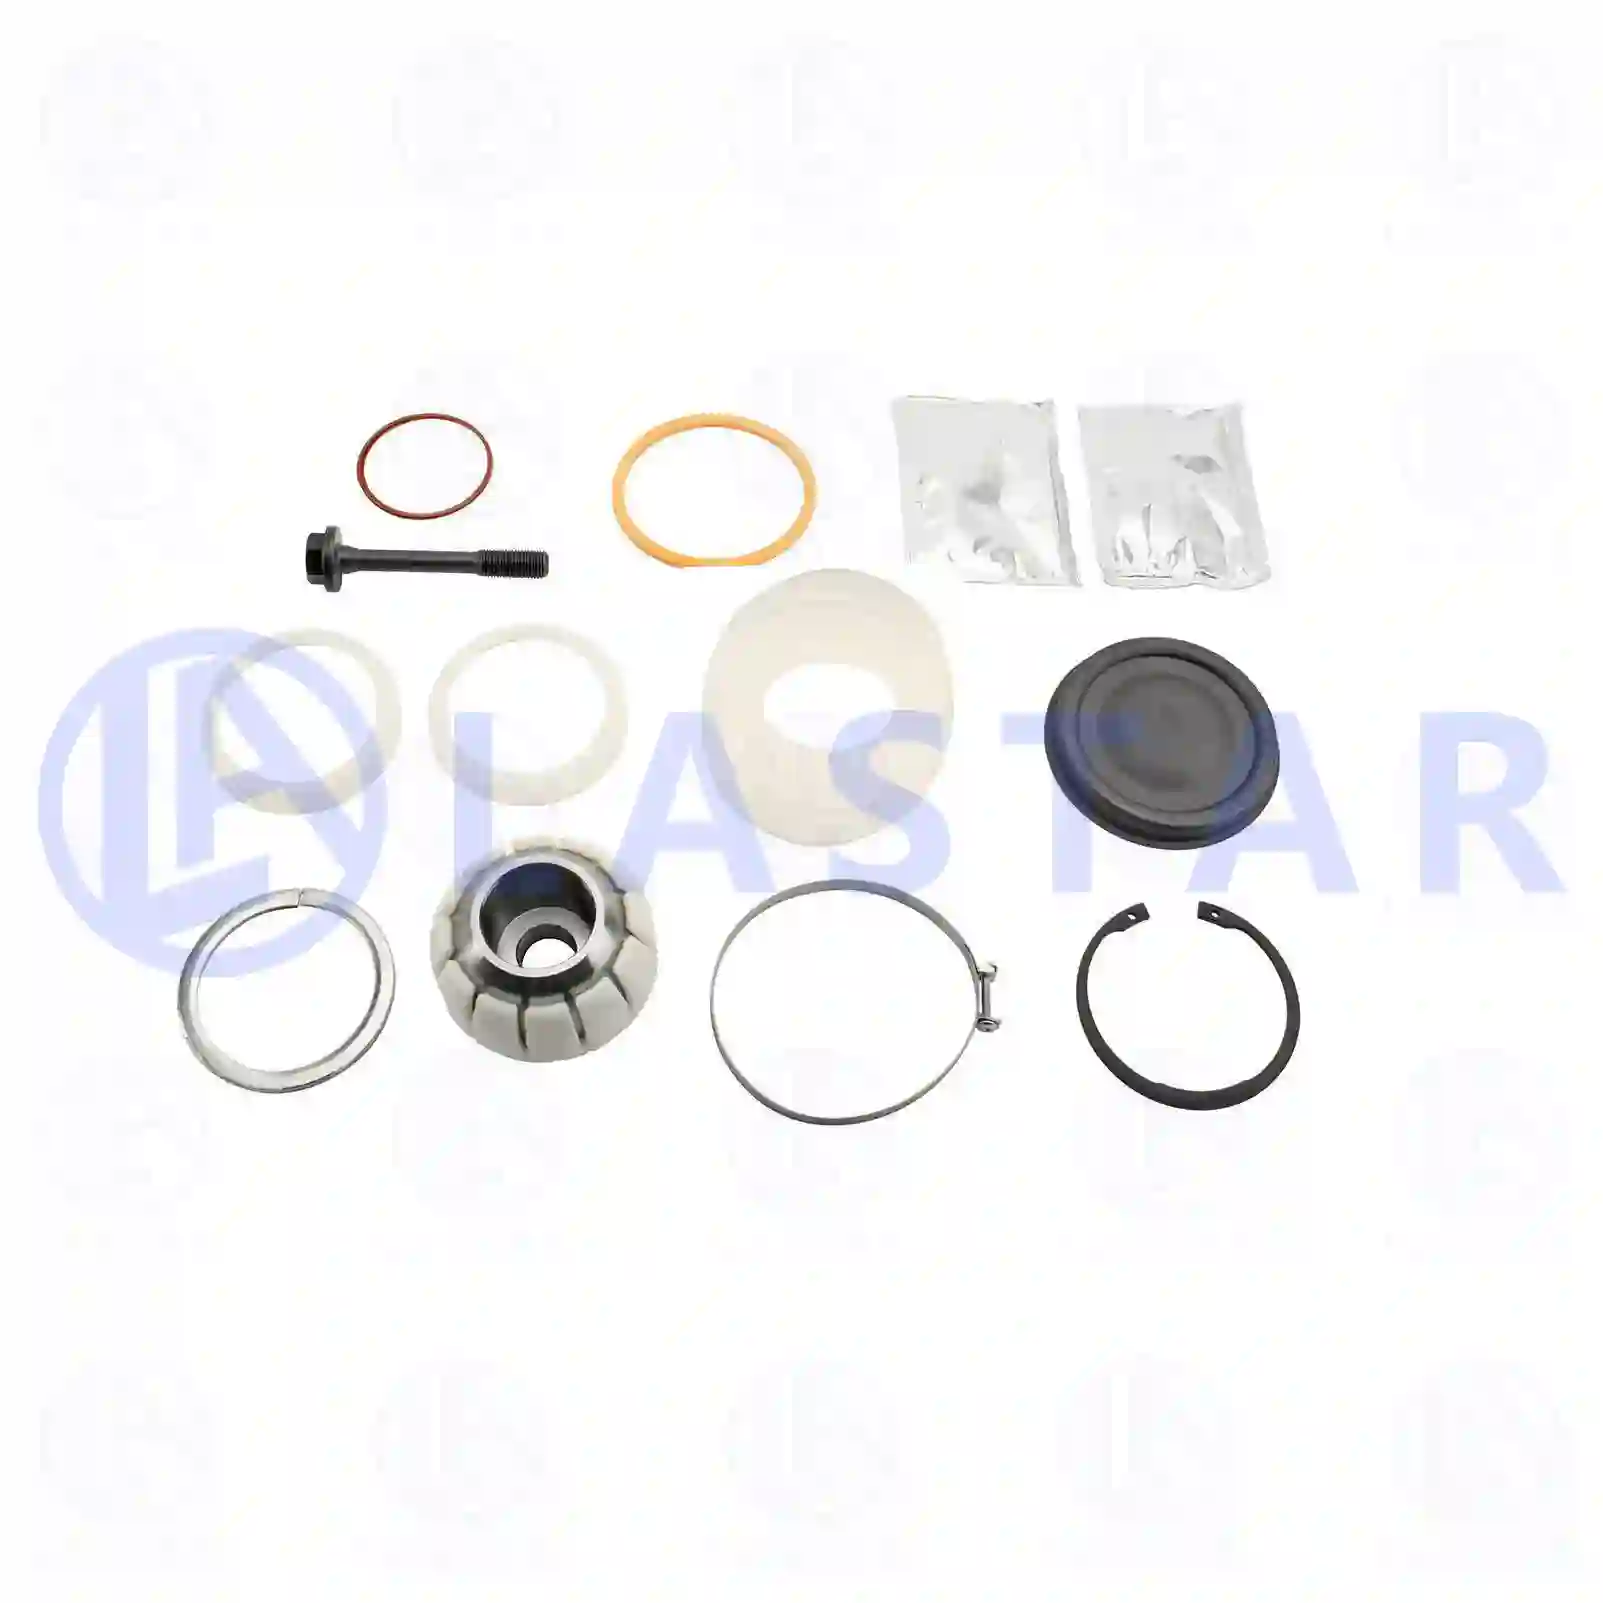 Repair kit, v-stay, 77729071, 273374 ||  77729071 Lastar Spare Part | Truck Spare Parts, Auotomotive Spare Parts Repair kit, v-stay, 77729071, 273374 ||  77729071 Lastar Spare Part | Truck Spare Parts, Auotomotive Spare Parts